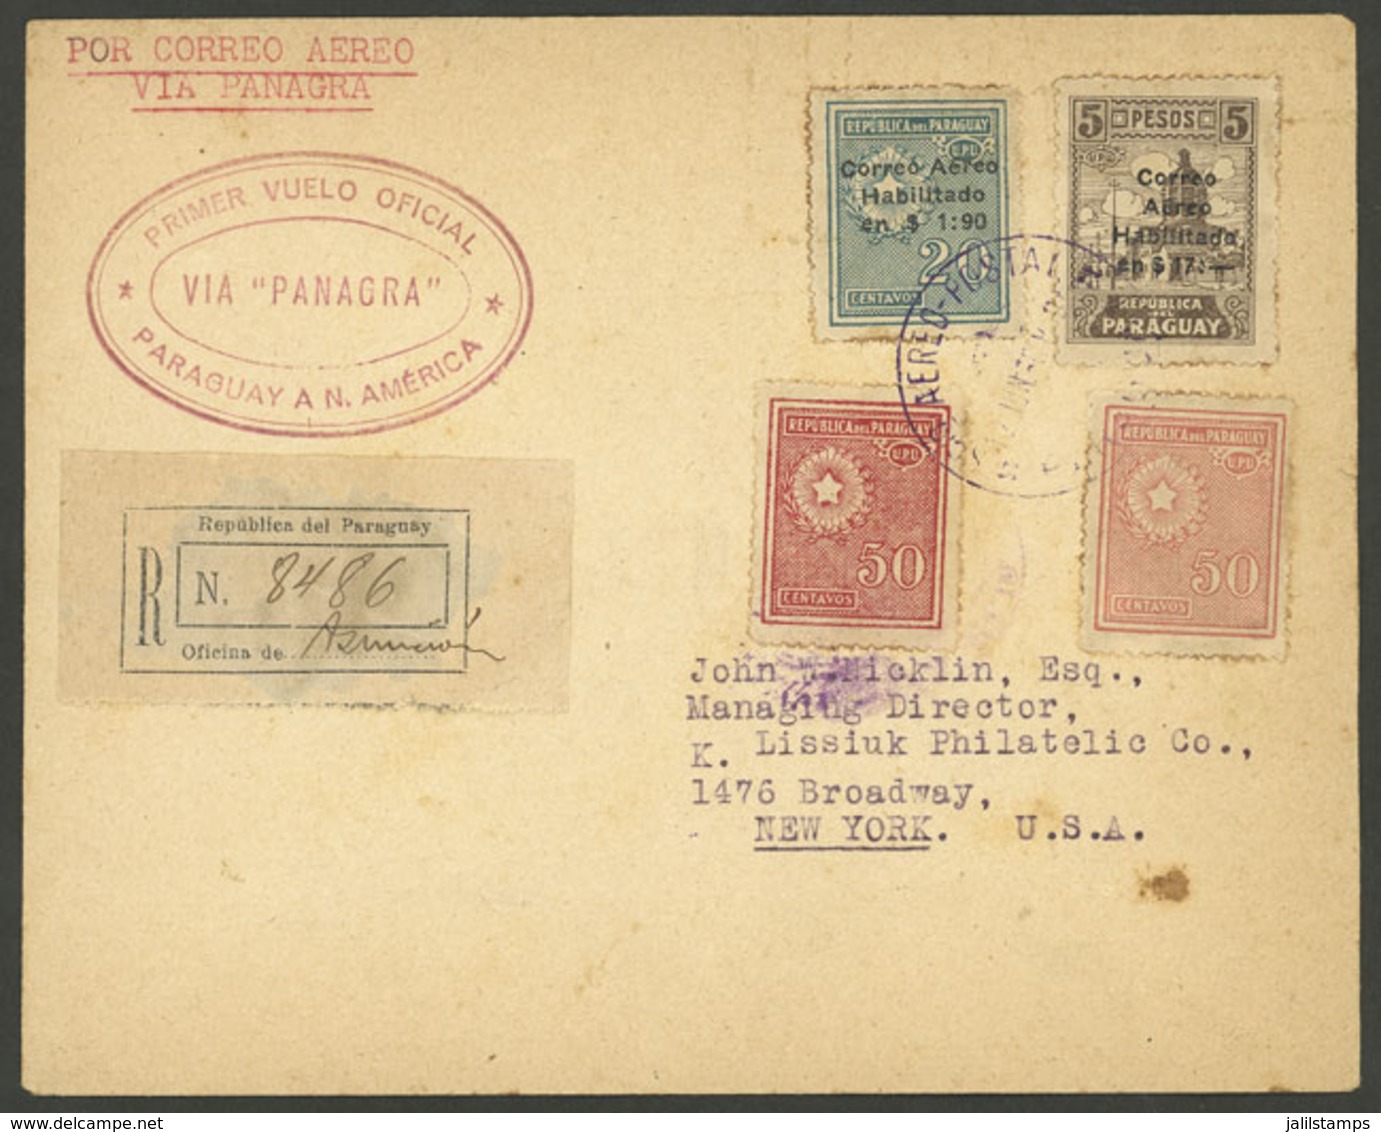 PARAGUAY: 12/JUN/1930 Asunción - New York, PANAGRA First Official Flight, Registered Cover With Arrival Backstamp Of 21/ - Paraguay